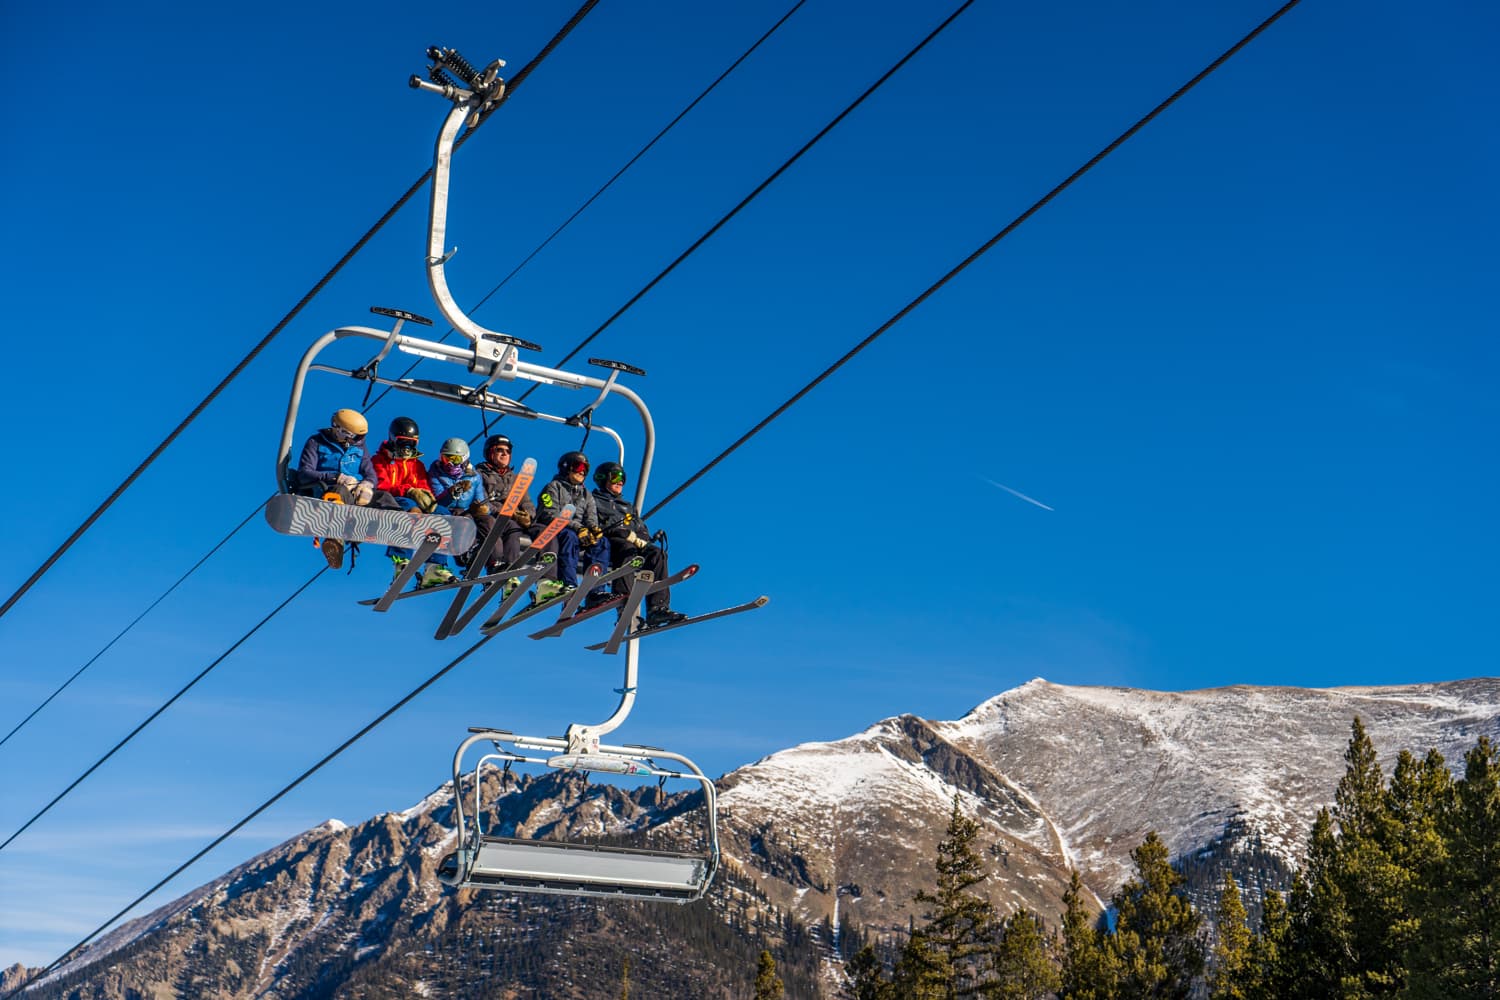 [PHOTOS] Opening Day at Copper Mountain, CO, Starts a Weeklong